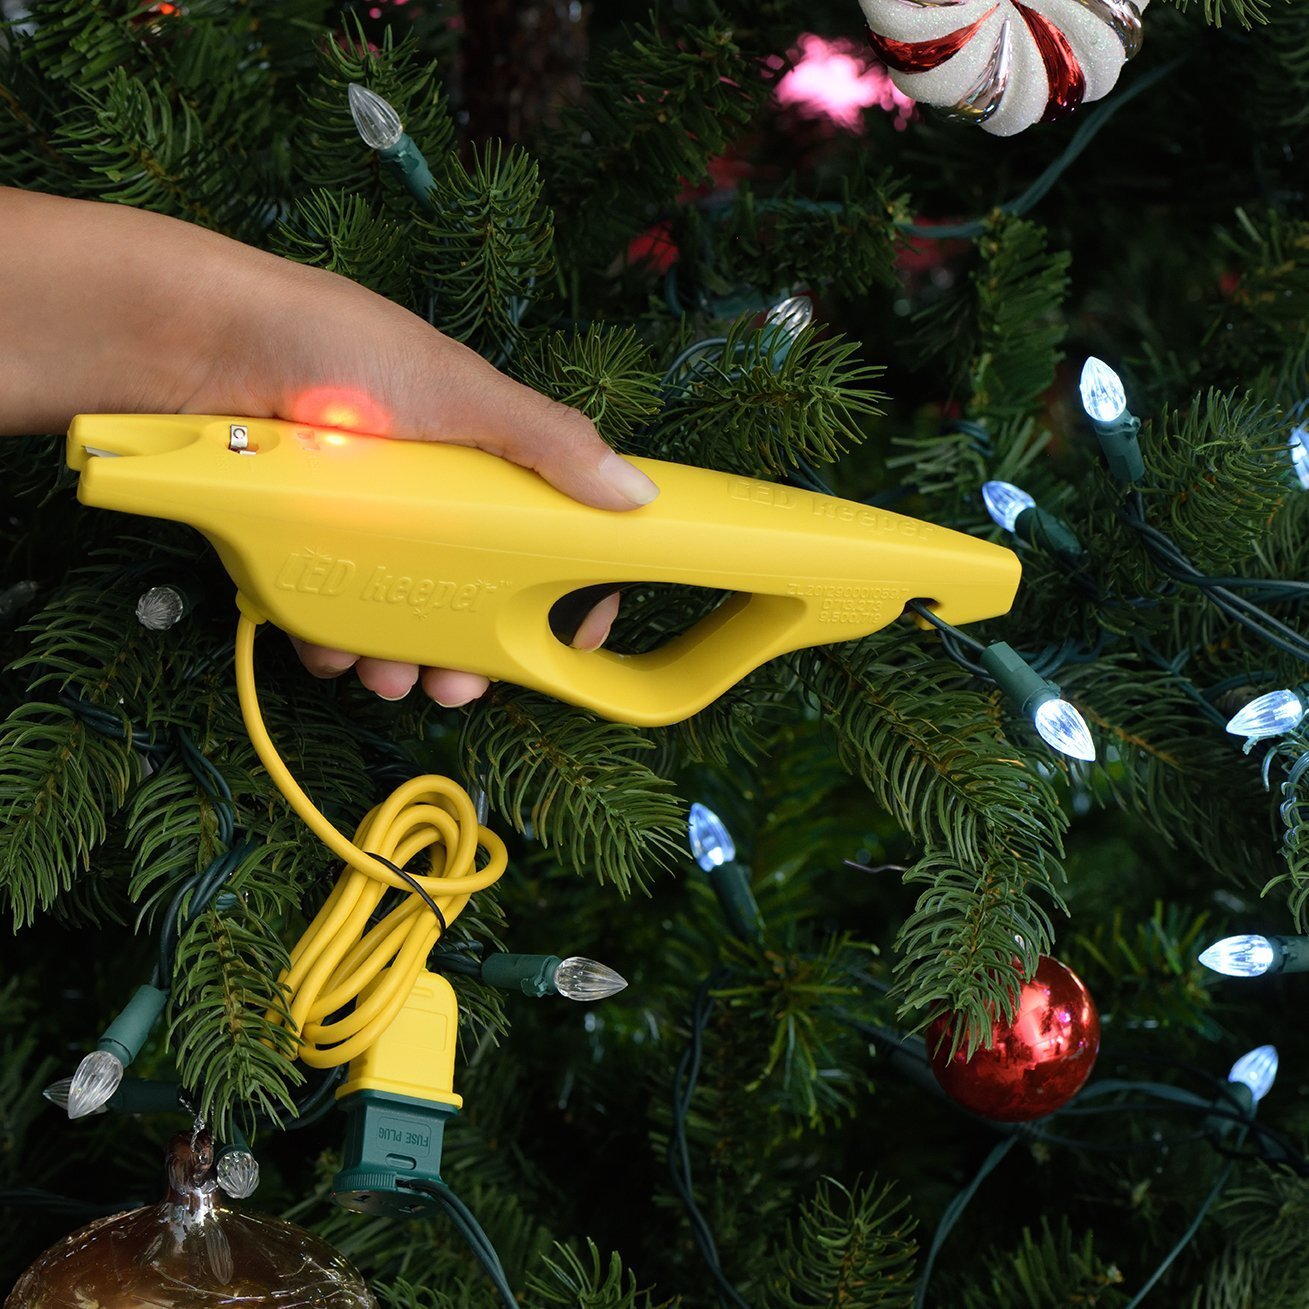 Review: The LightKeeper Pro Fixes and Saves Holiday Lights